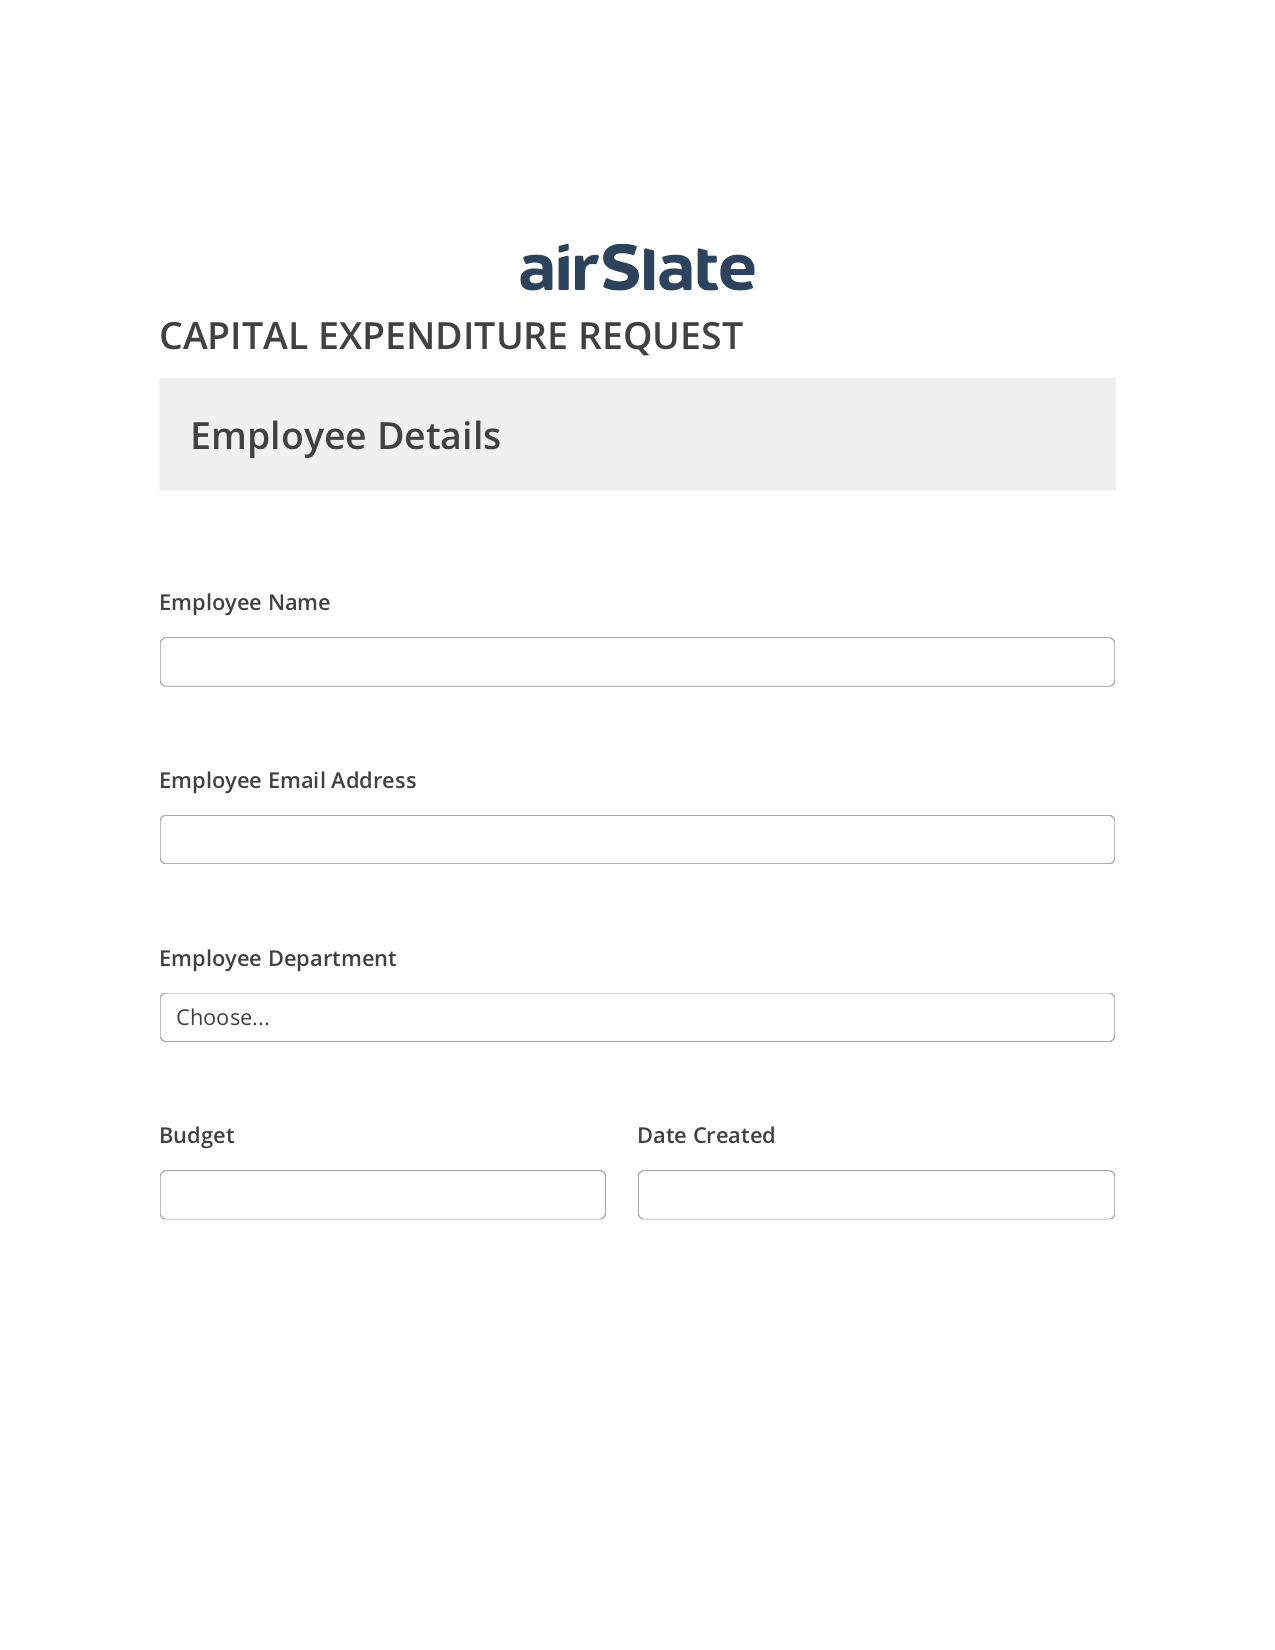 Multirole Capital Expenditure Request Approval Workflow Pre-fill from CSV File Bot, Create slate bot, Export to NetSuite Bot